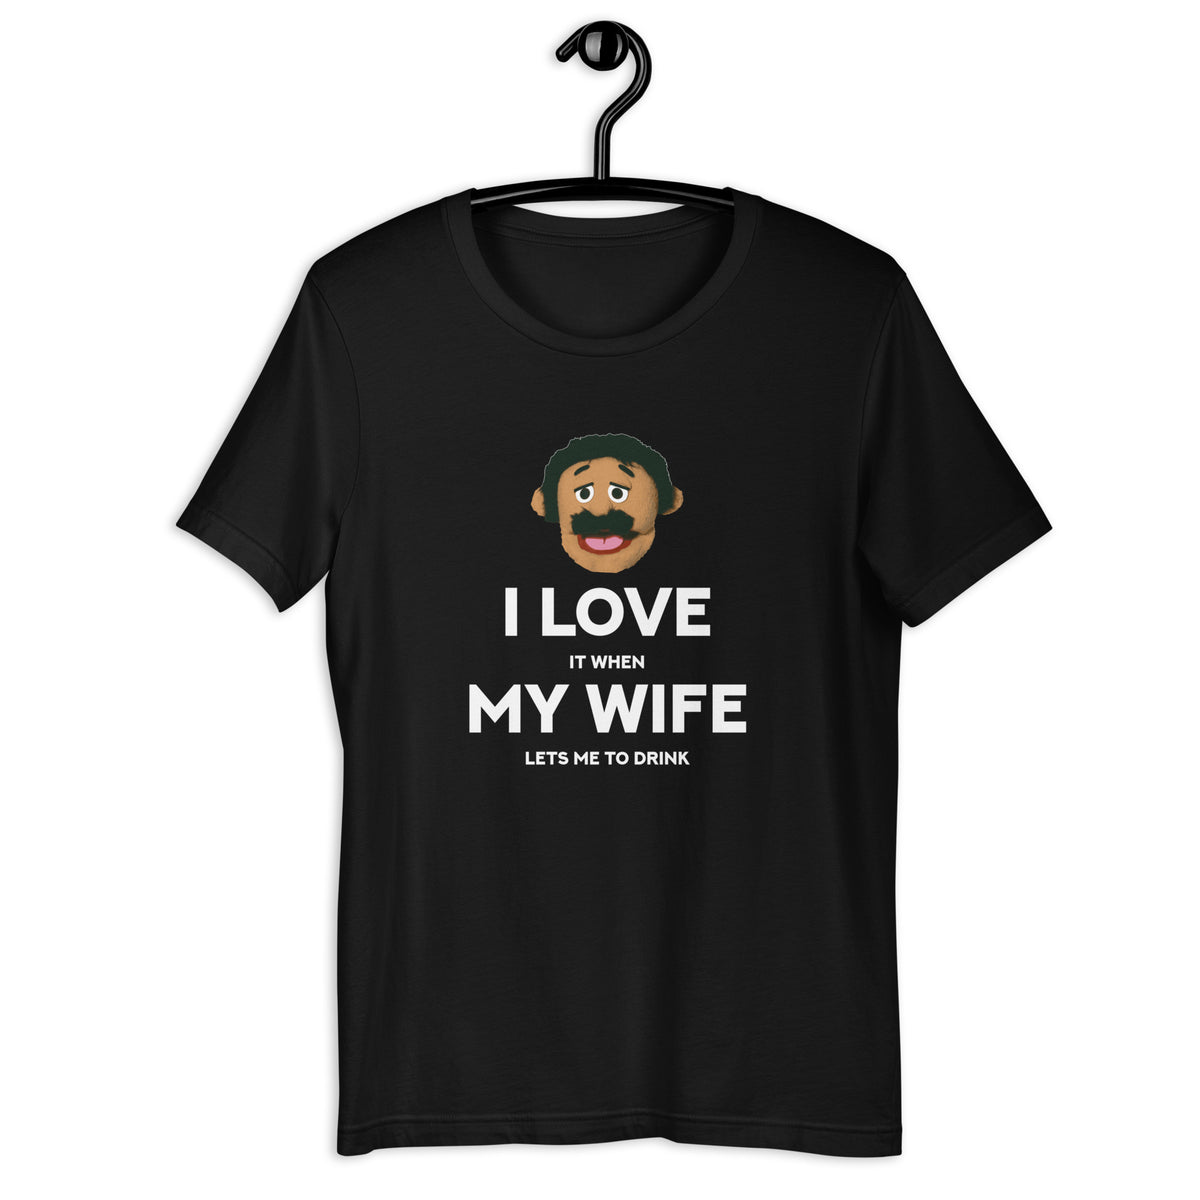 I Love It When My Wife Lets Me to Drink T-Shirt - SHOPNOO